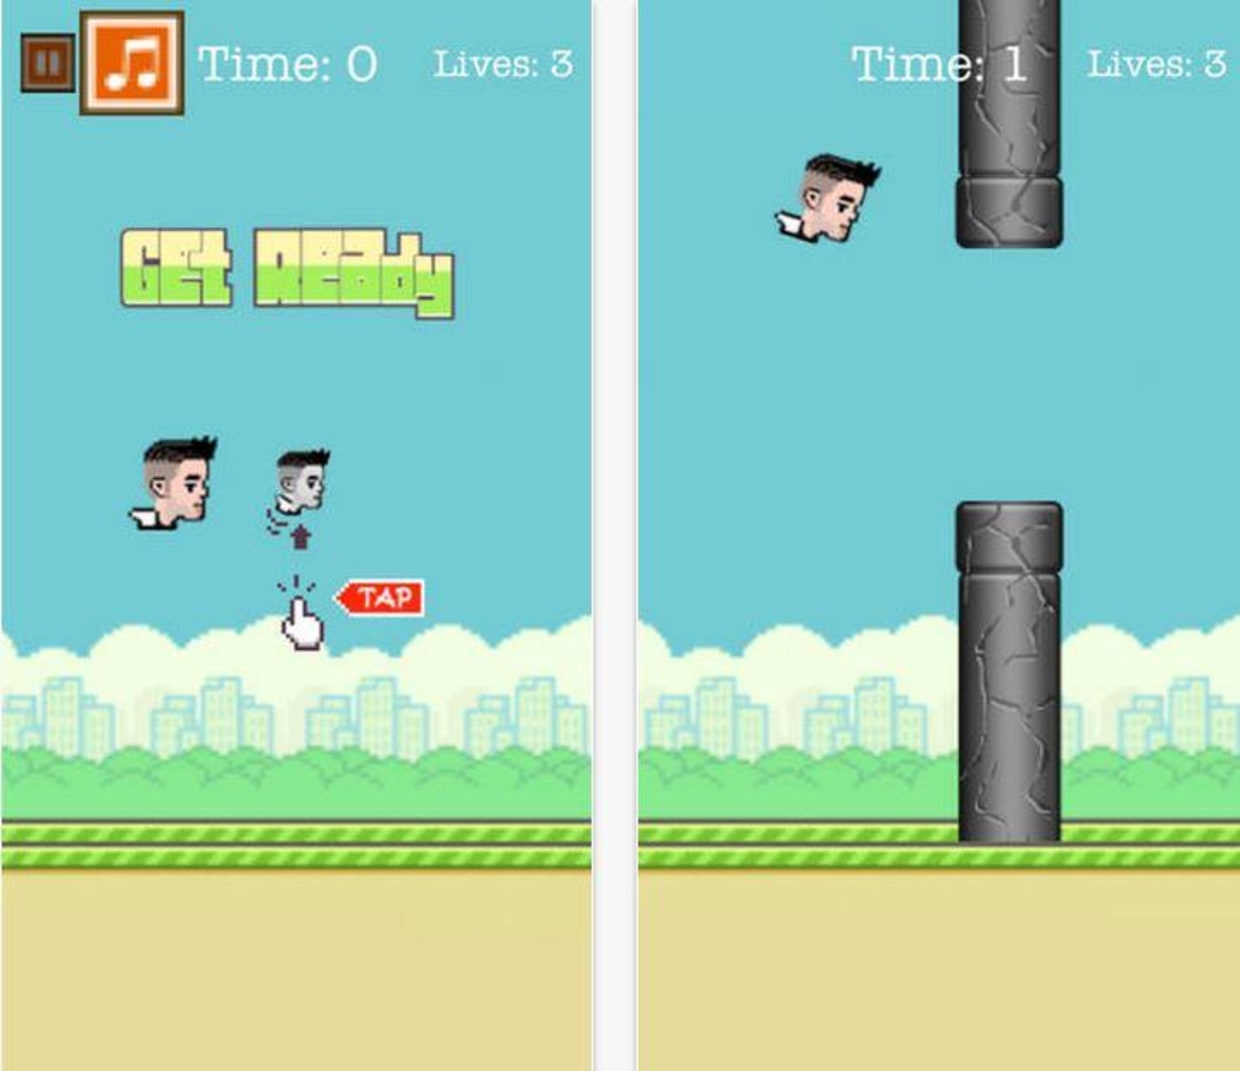 Hipsters, Bieber and More: 5 Most Ridiculous Flappy Bird Clones